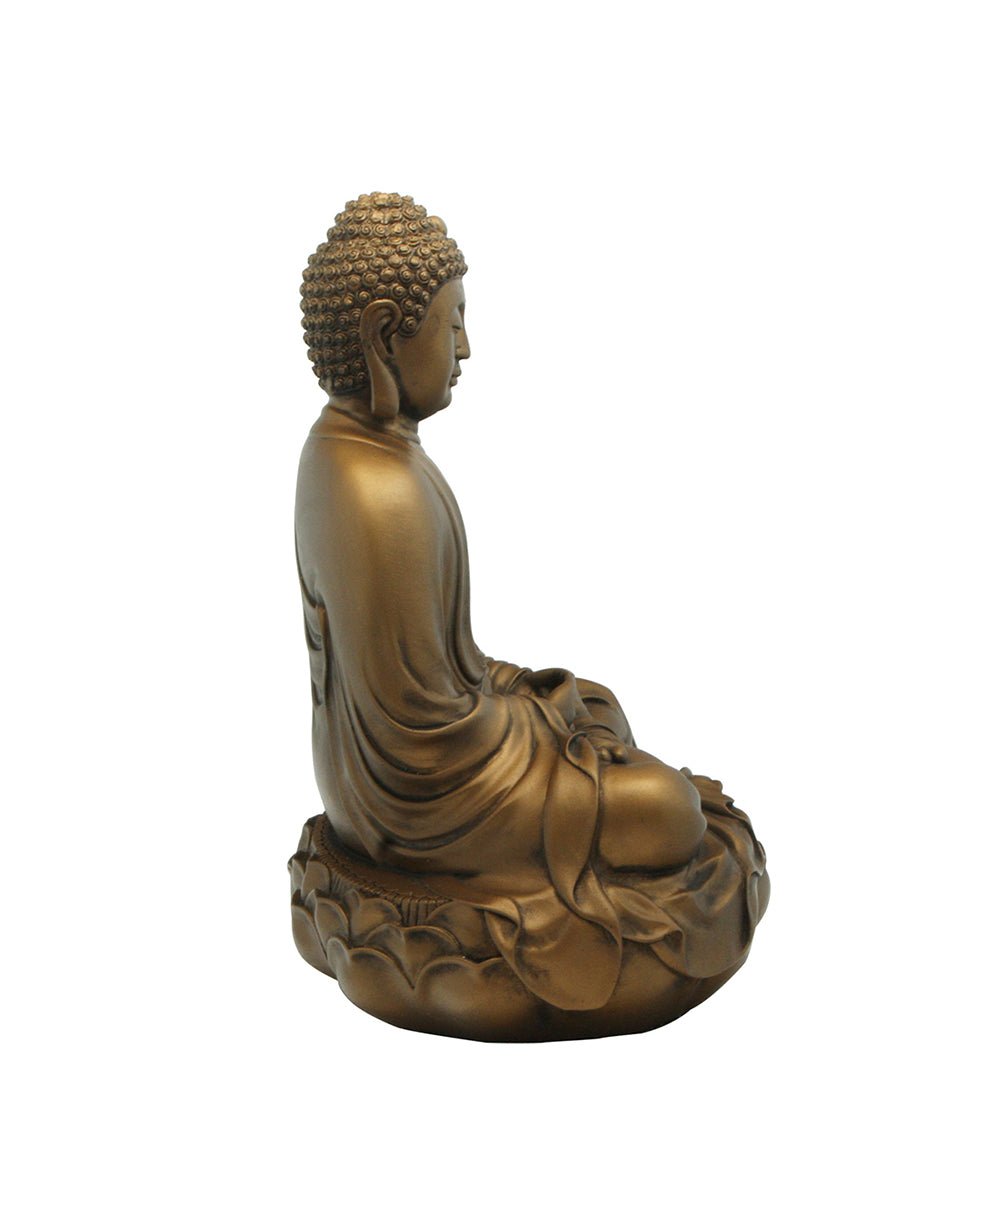 Buddha on Lotus Statue in Bronze Color, 11.5 Inches - Sculptures & Statues